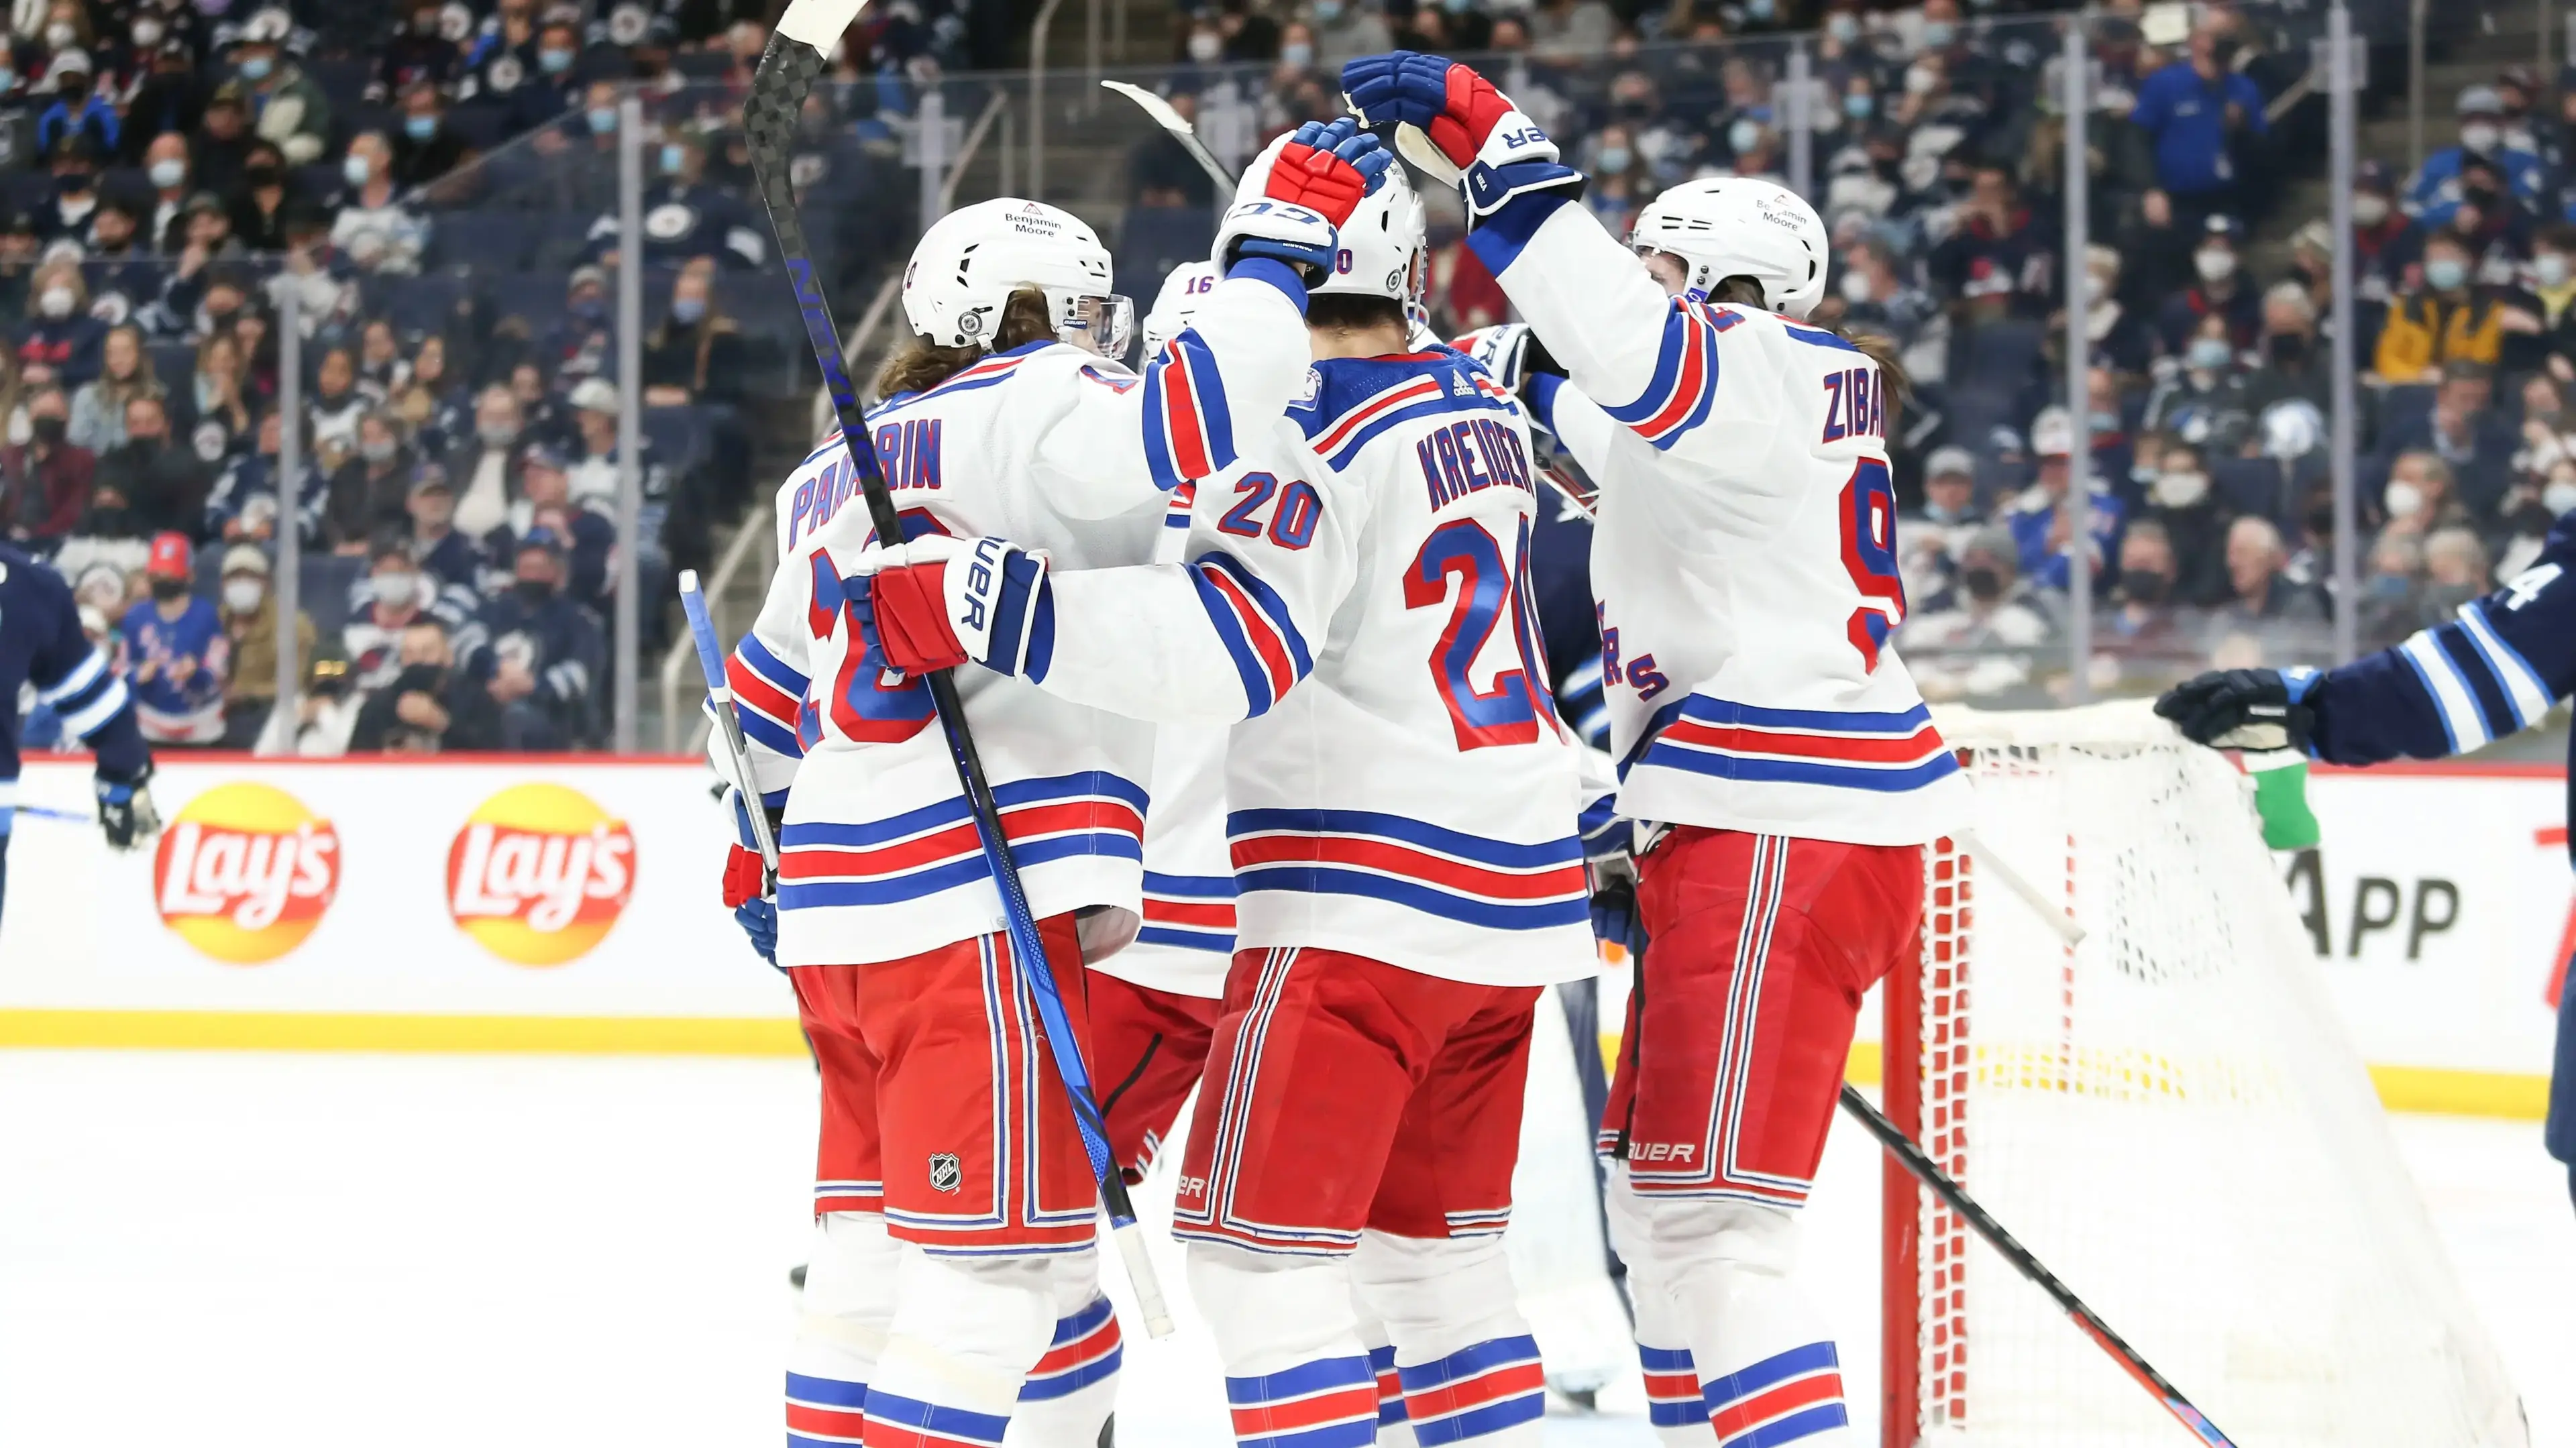 Mar 6, 2022; Winnipeg, Manitoba, CAN; New York Rangers forward Chris Kreider (20) is congratulated by his team mates after his goal against the Winnipeg Jets during the first period at Canada Life Centre. Mandatory Credit: Terrence Lee-USA TODAY Sports / Terrence Lee-USA TODAY Sports